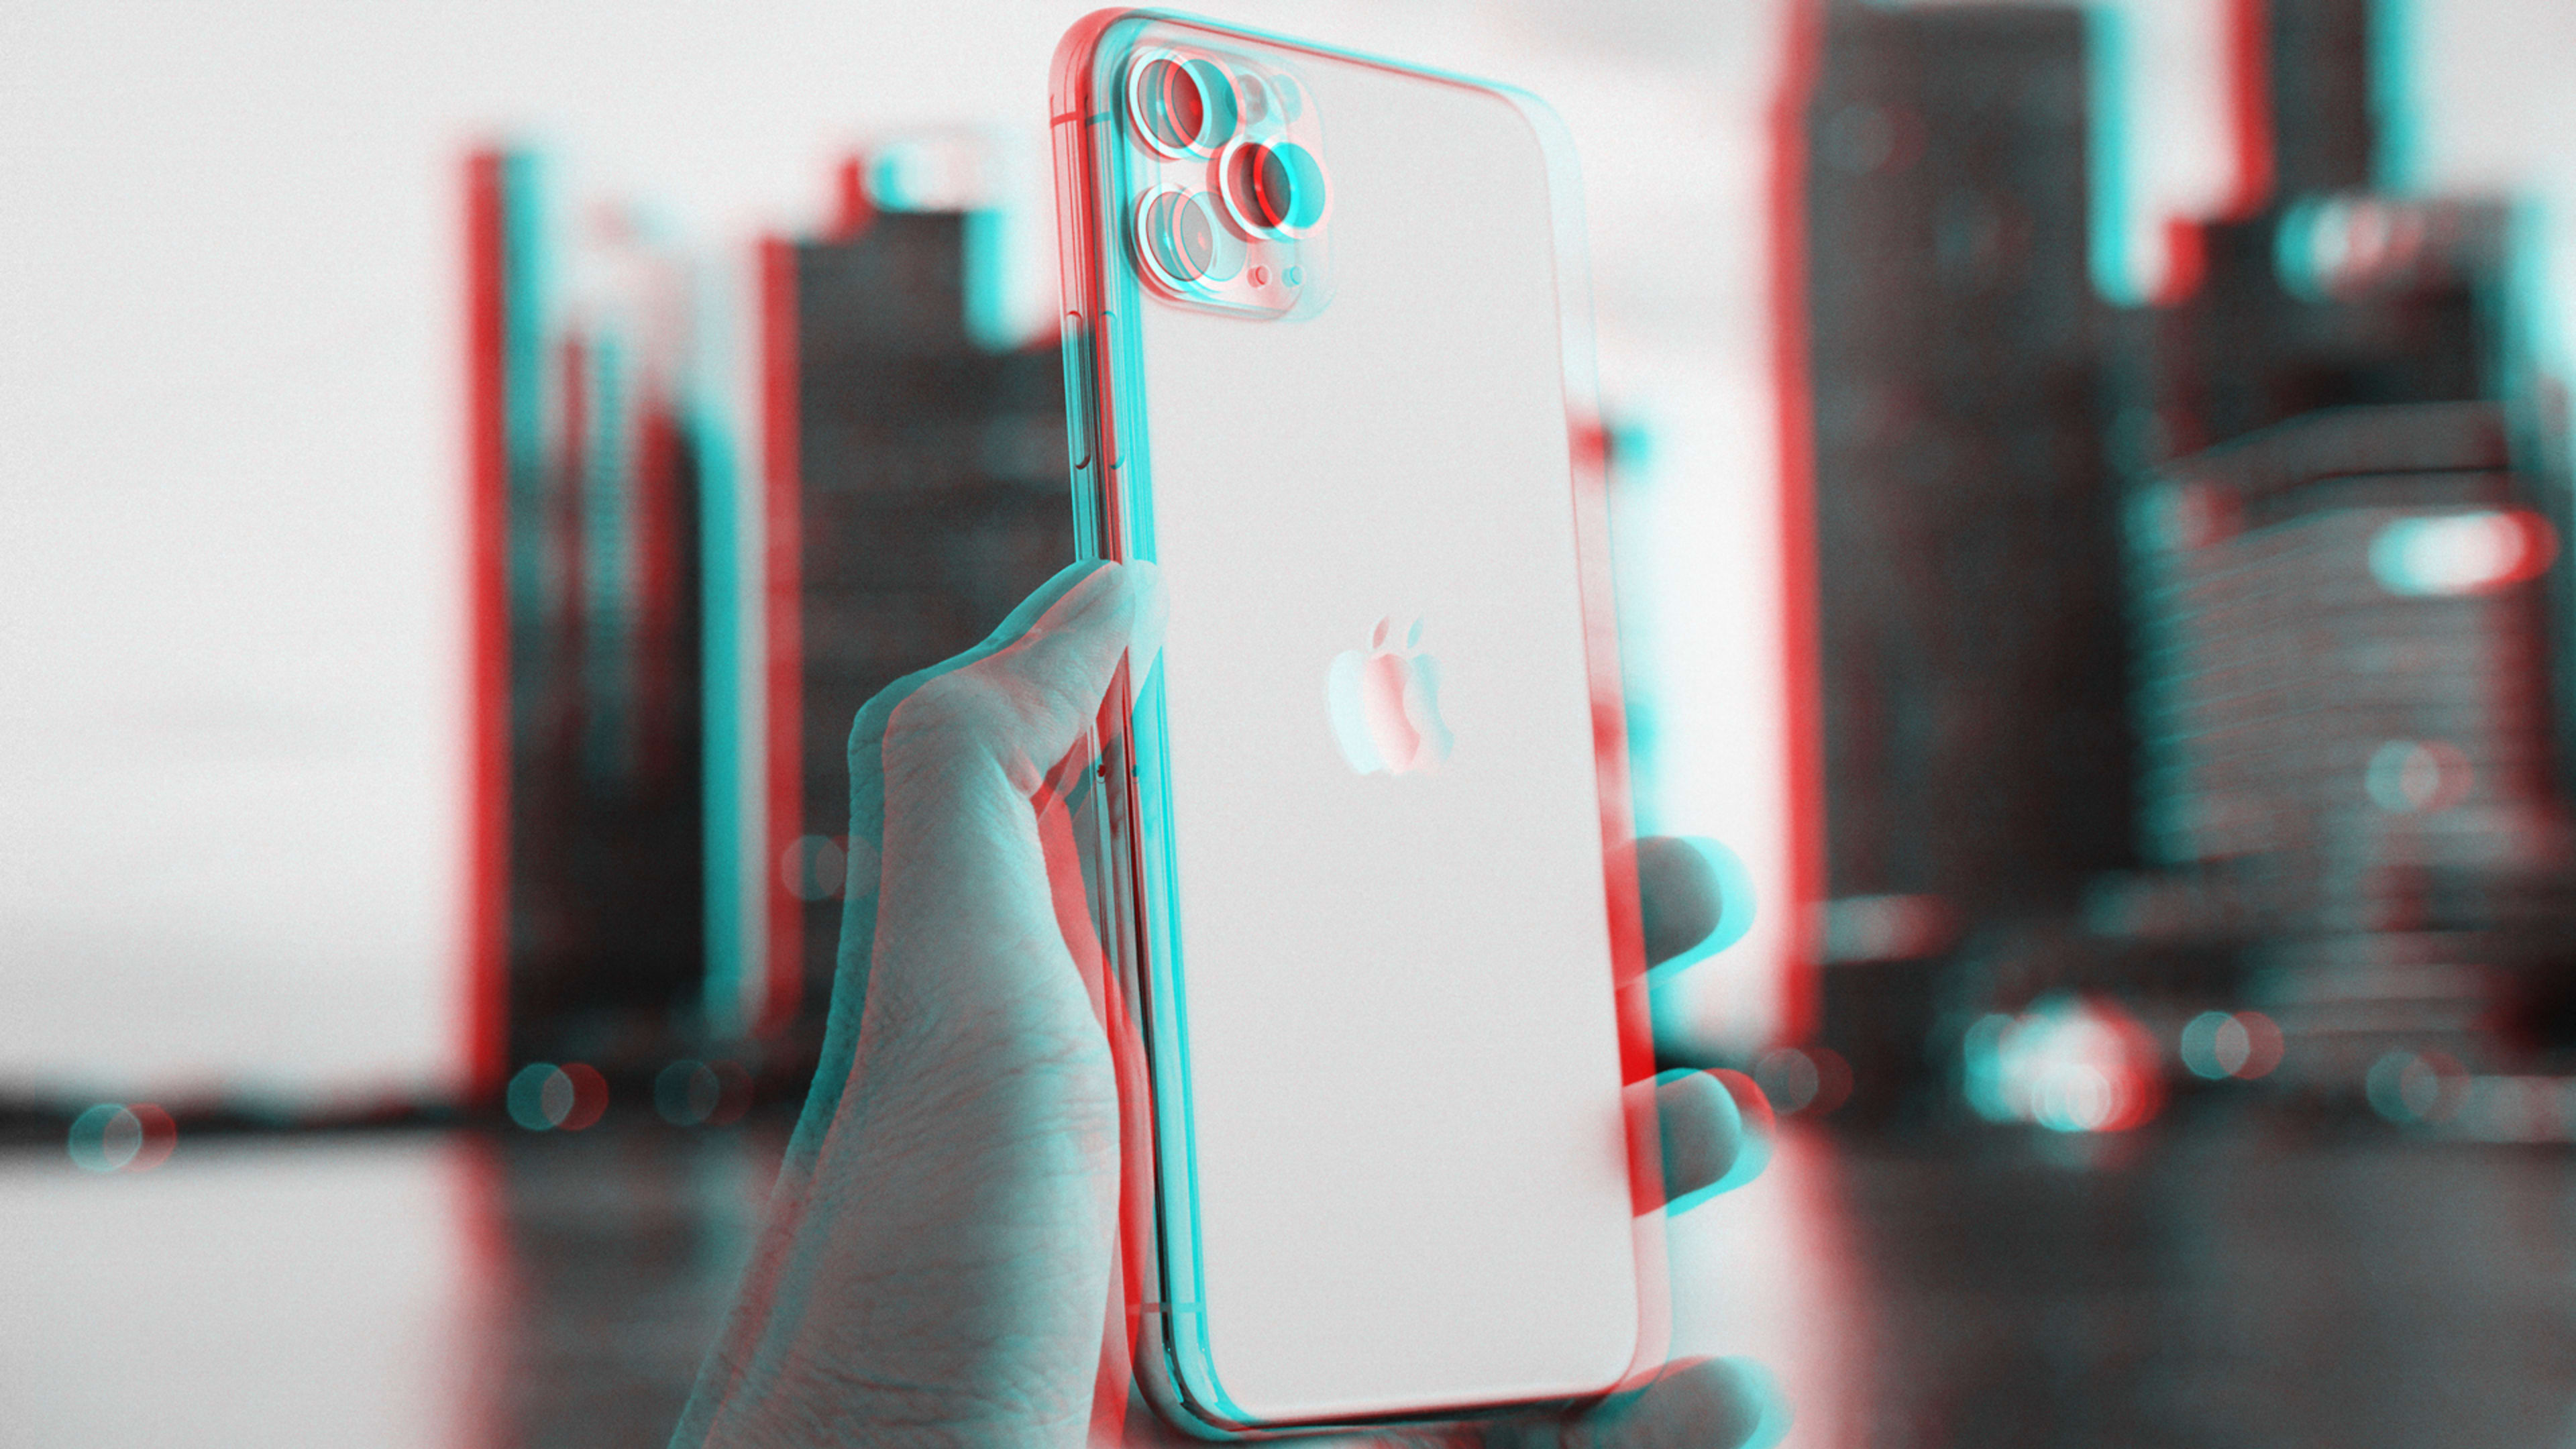 The next iPhone will get a ‘world facing’ 3D camera